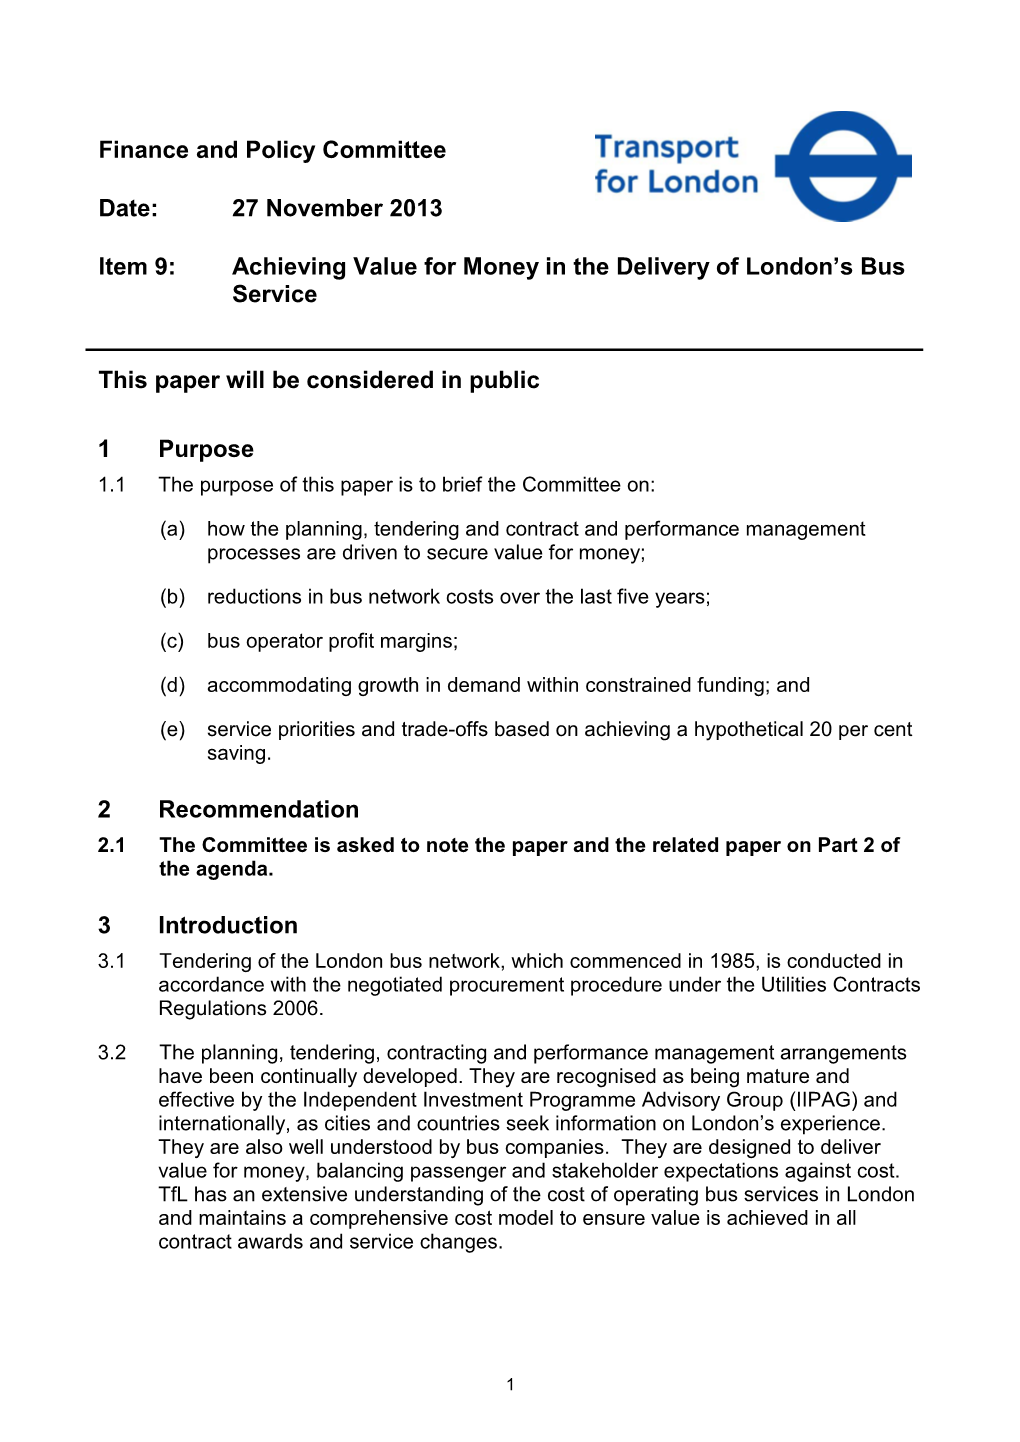 Achieving Value for Money in the Delivery of London's Bus Service